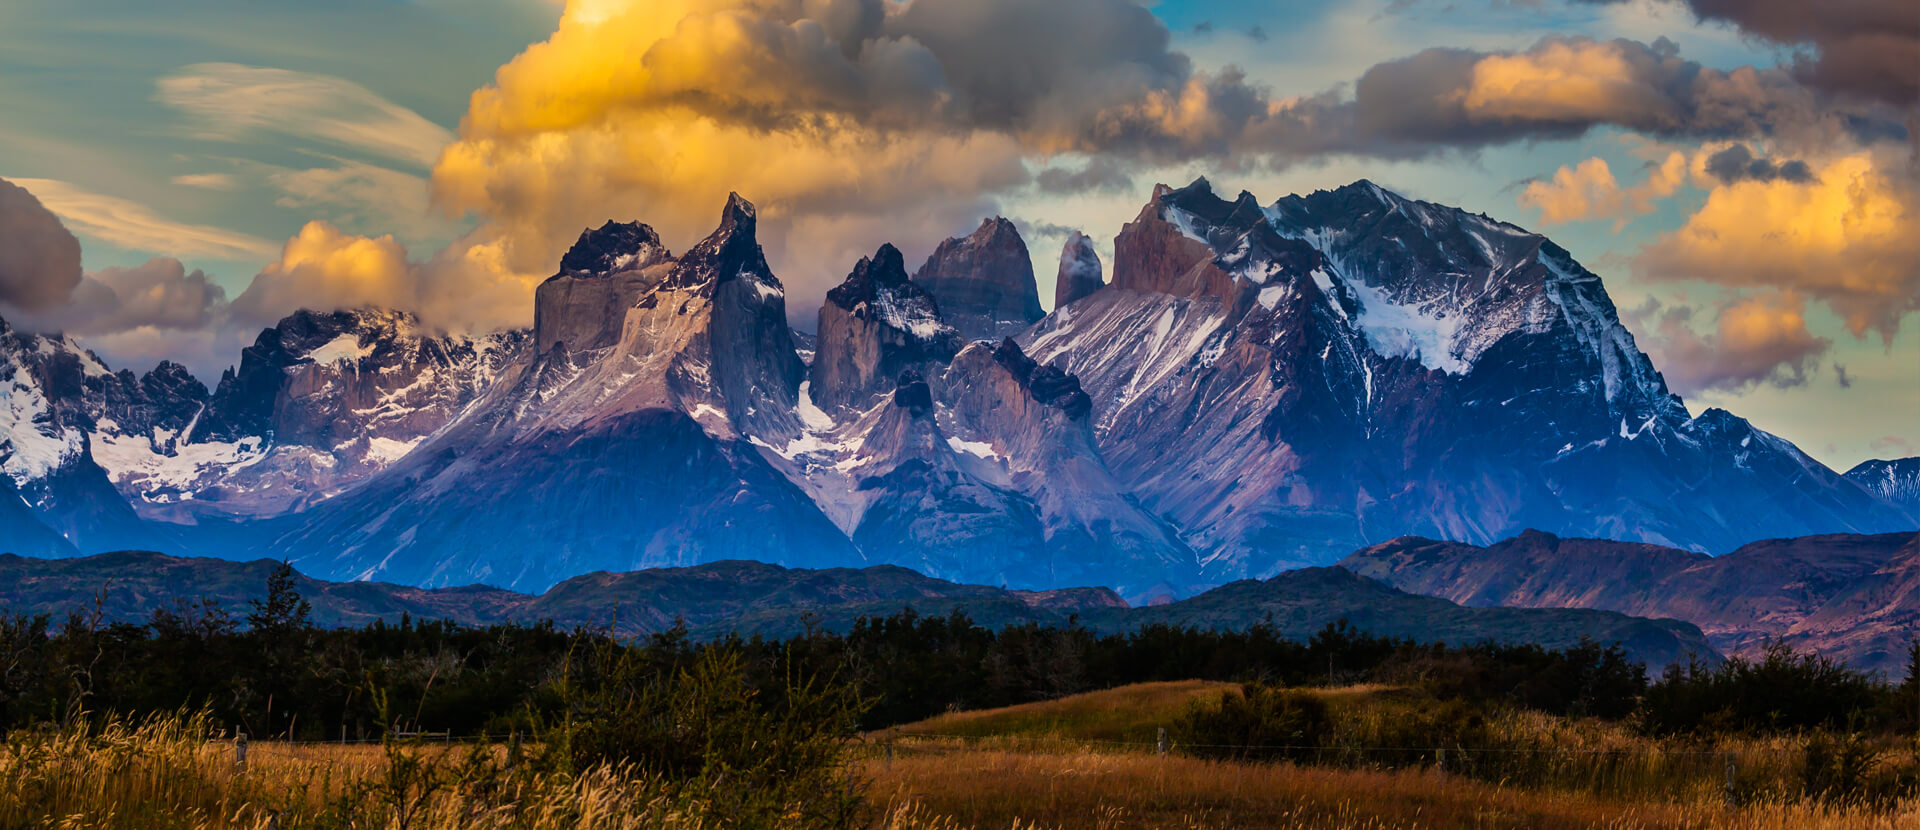 So why is Chile such a special destination?